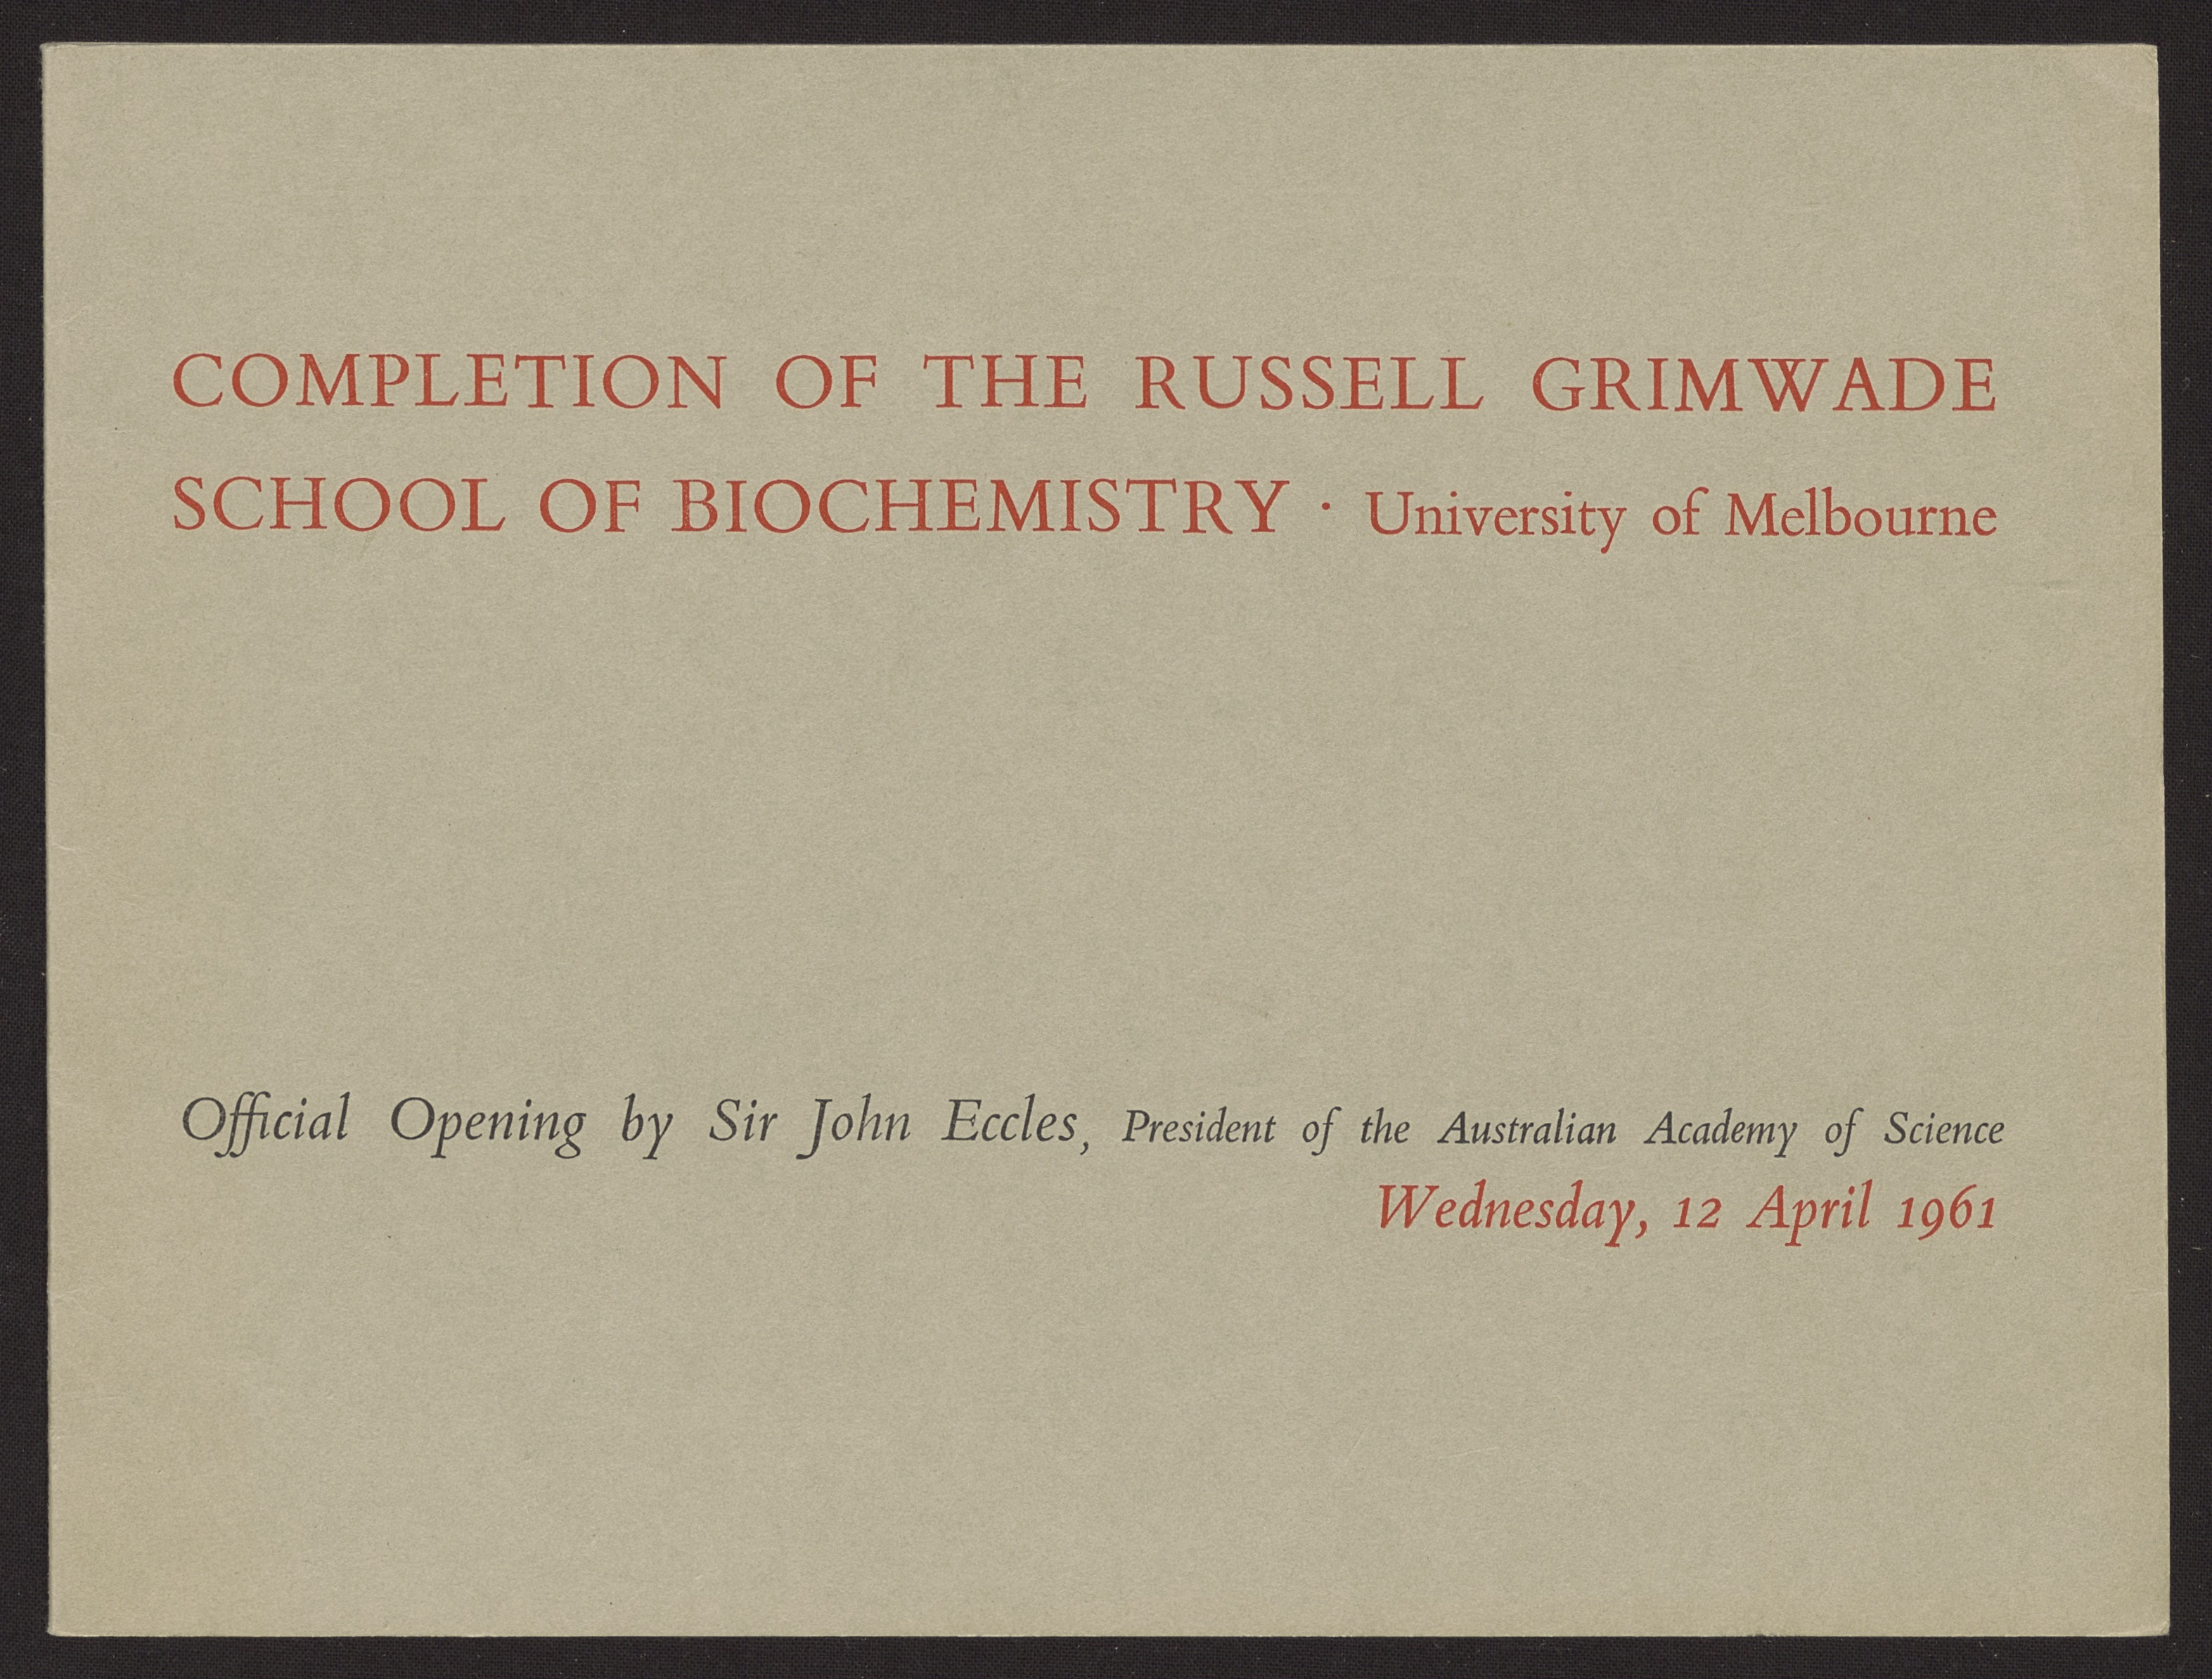 Completion of the Russell Grimwade School of Biochemistry, University of Melbourne, Sir Wilfrid Russell and Lady Mabel Grimwade collection,  12 April 1961, 1975.0089.00339